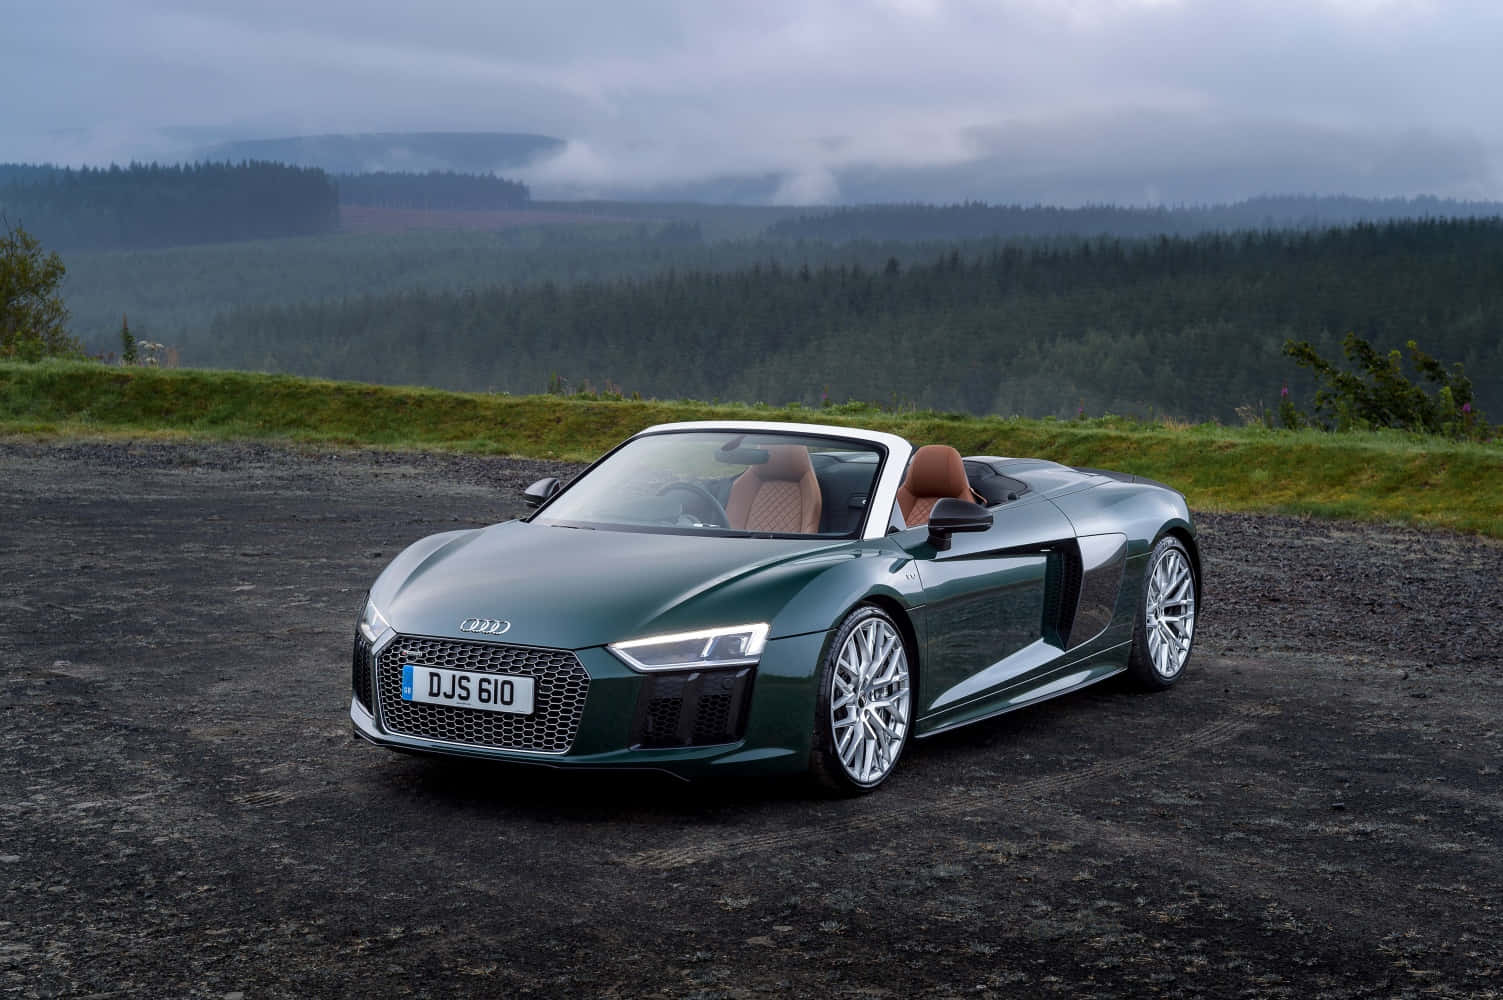 Enjoy the Luxury and Power of the Audi R8